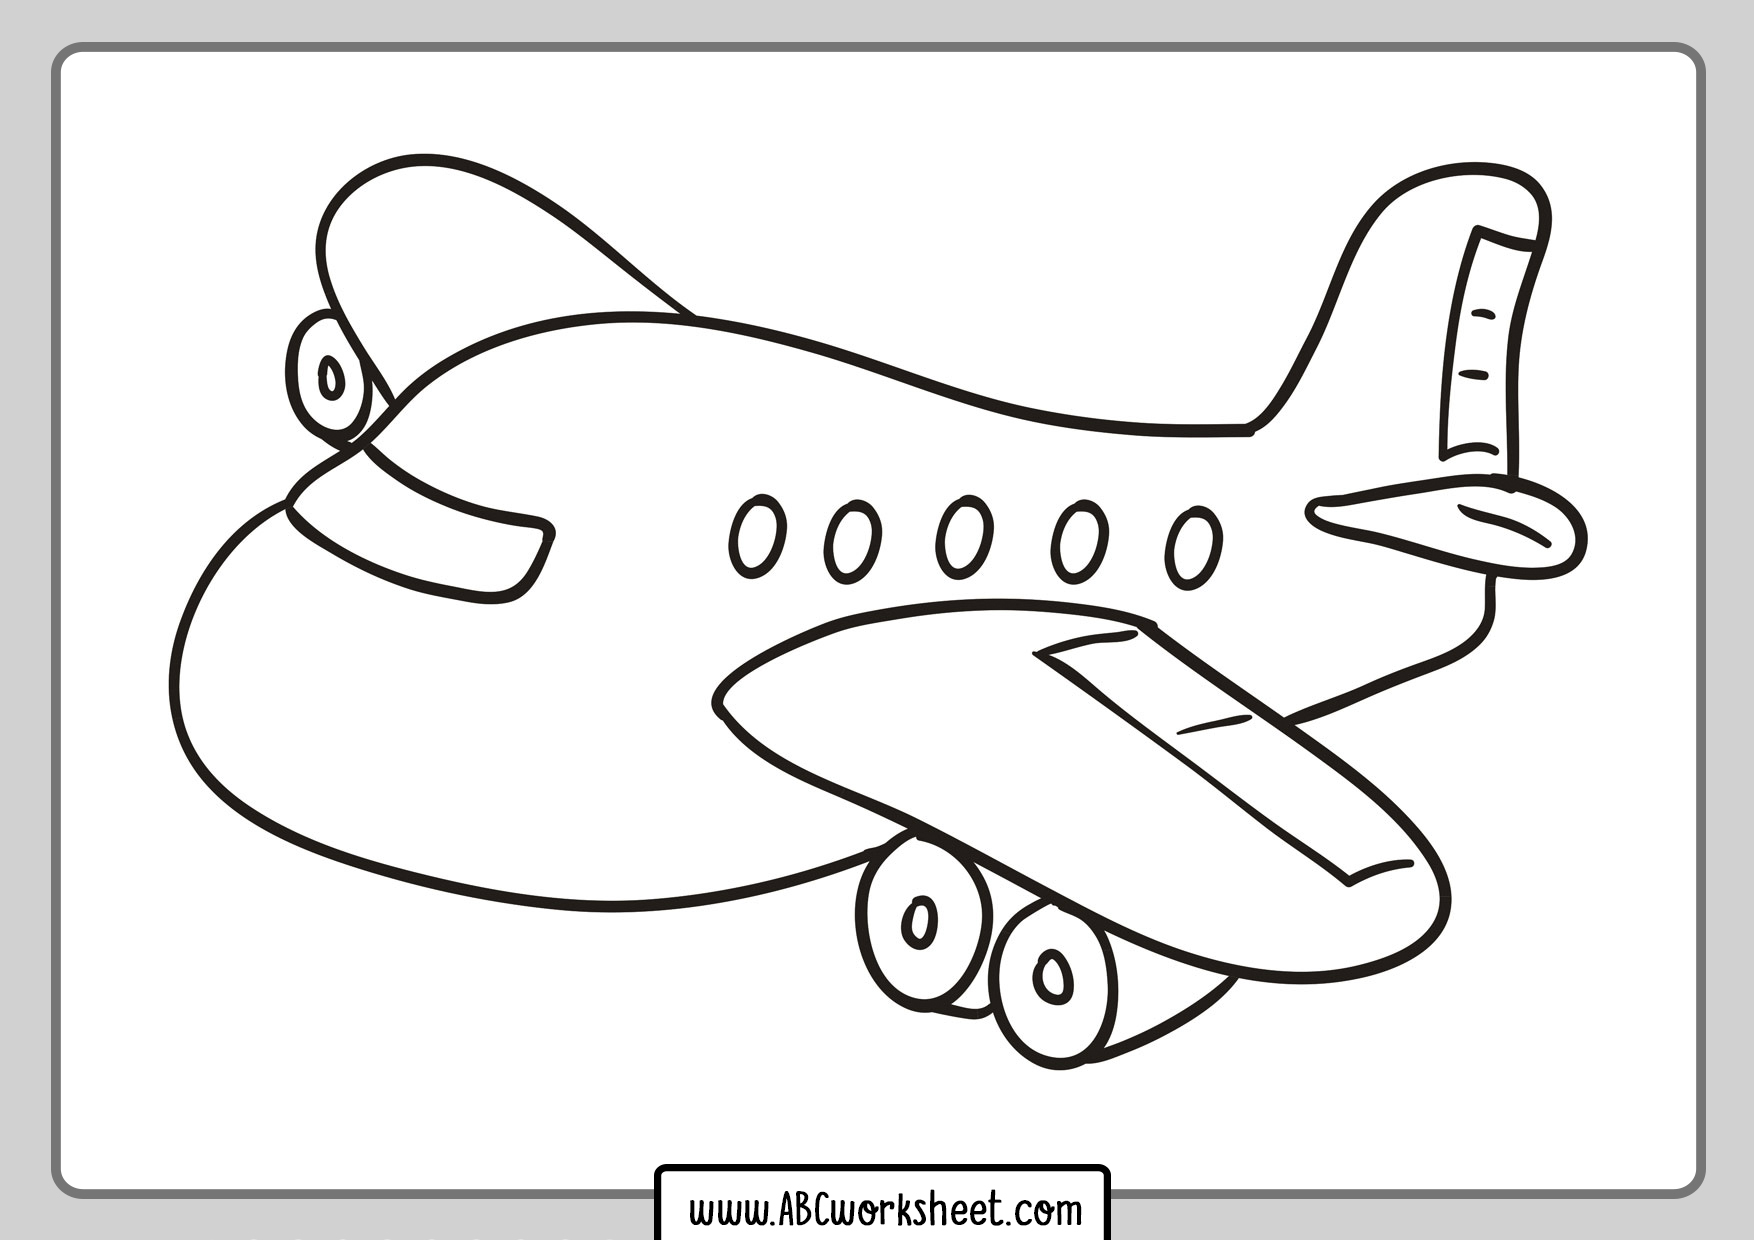 Airplane Coloring Page for Children - ABC Worksheet